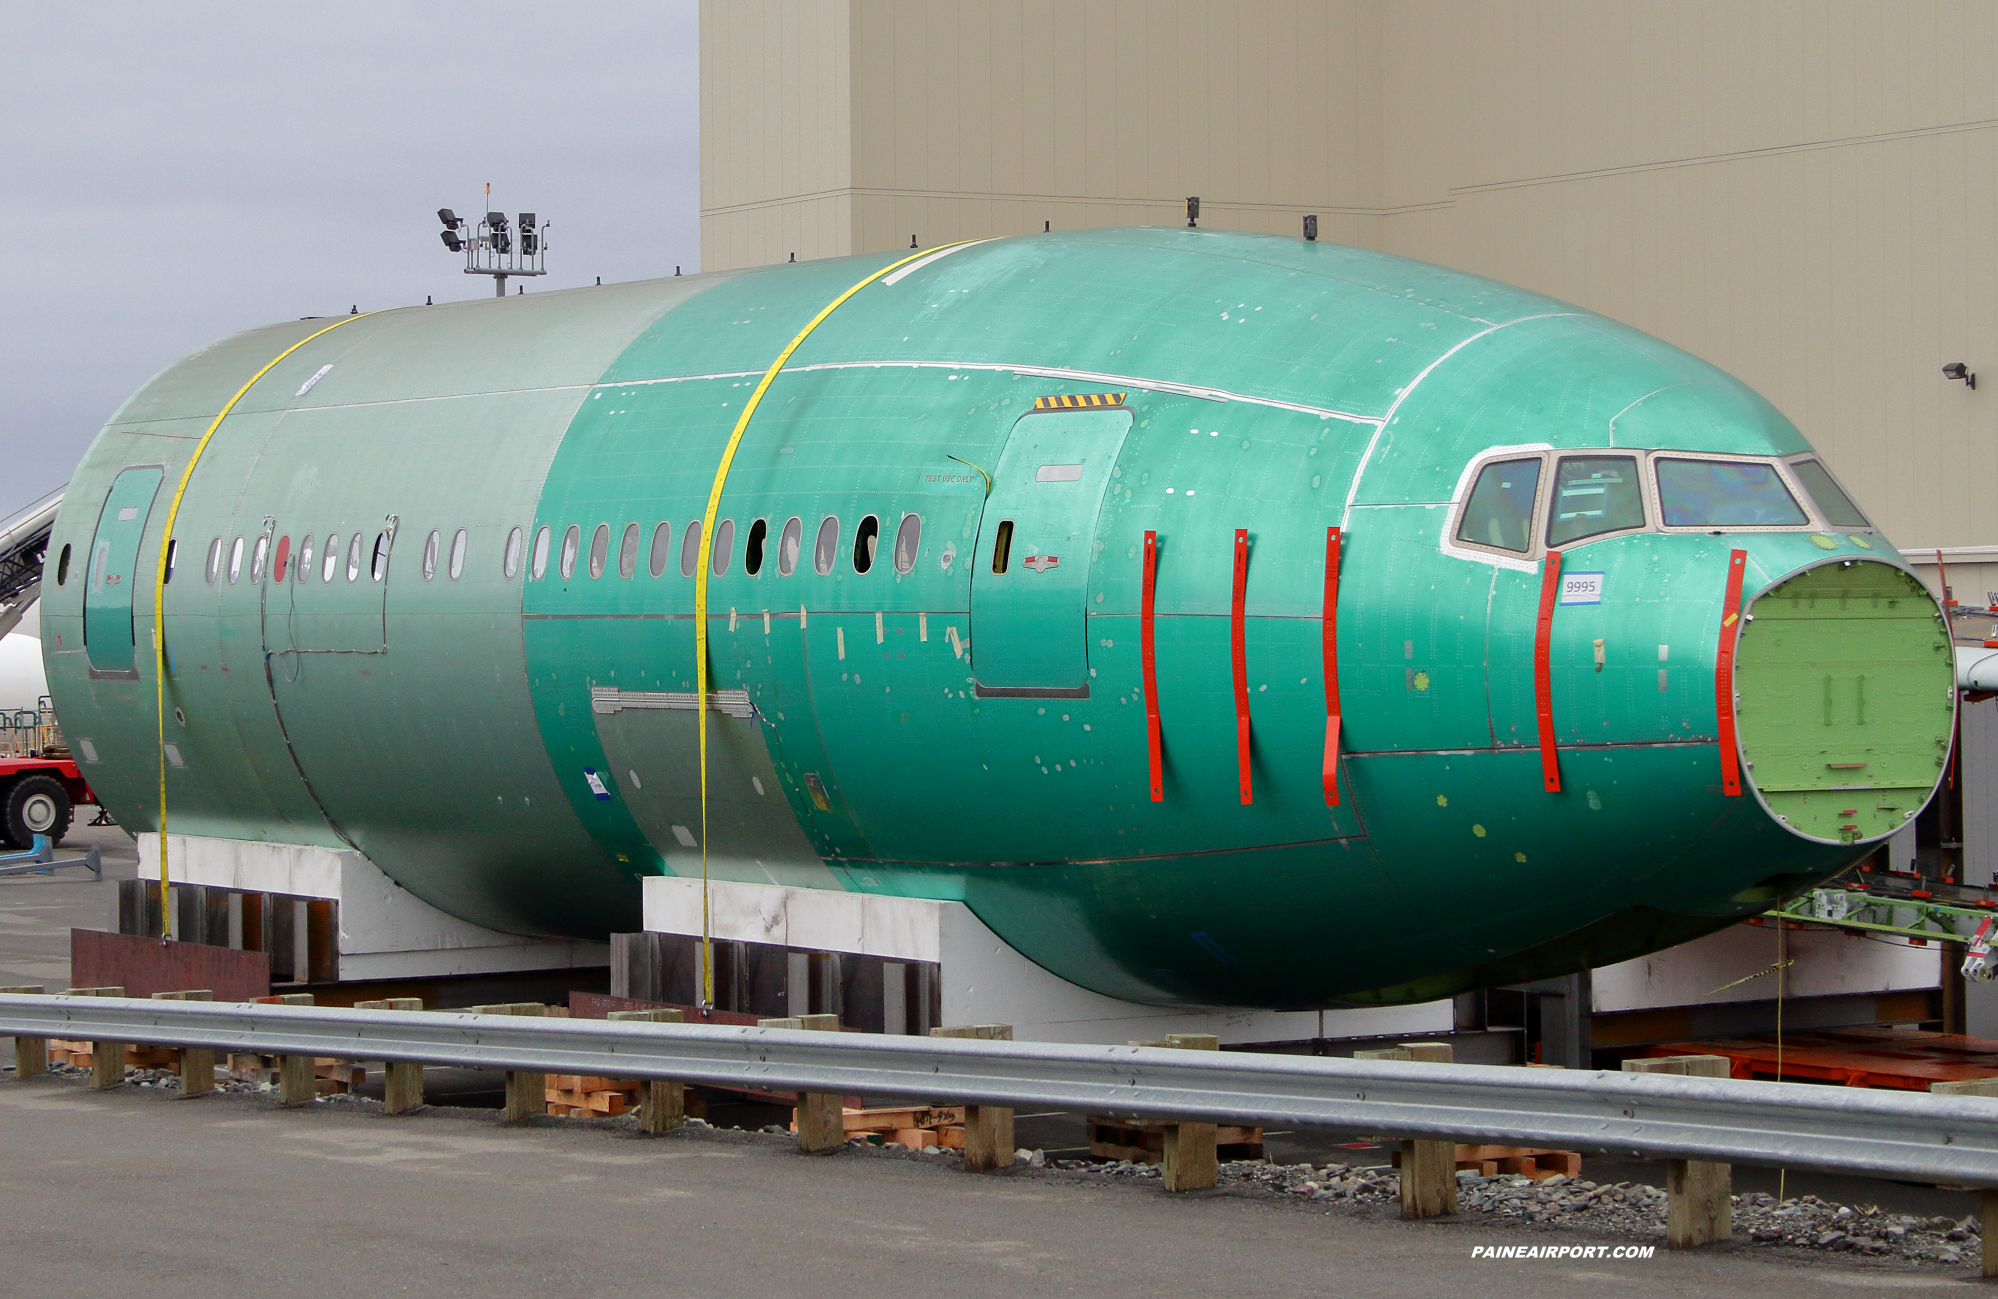 777-9 static test frame at Paine Field